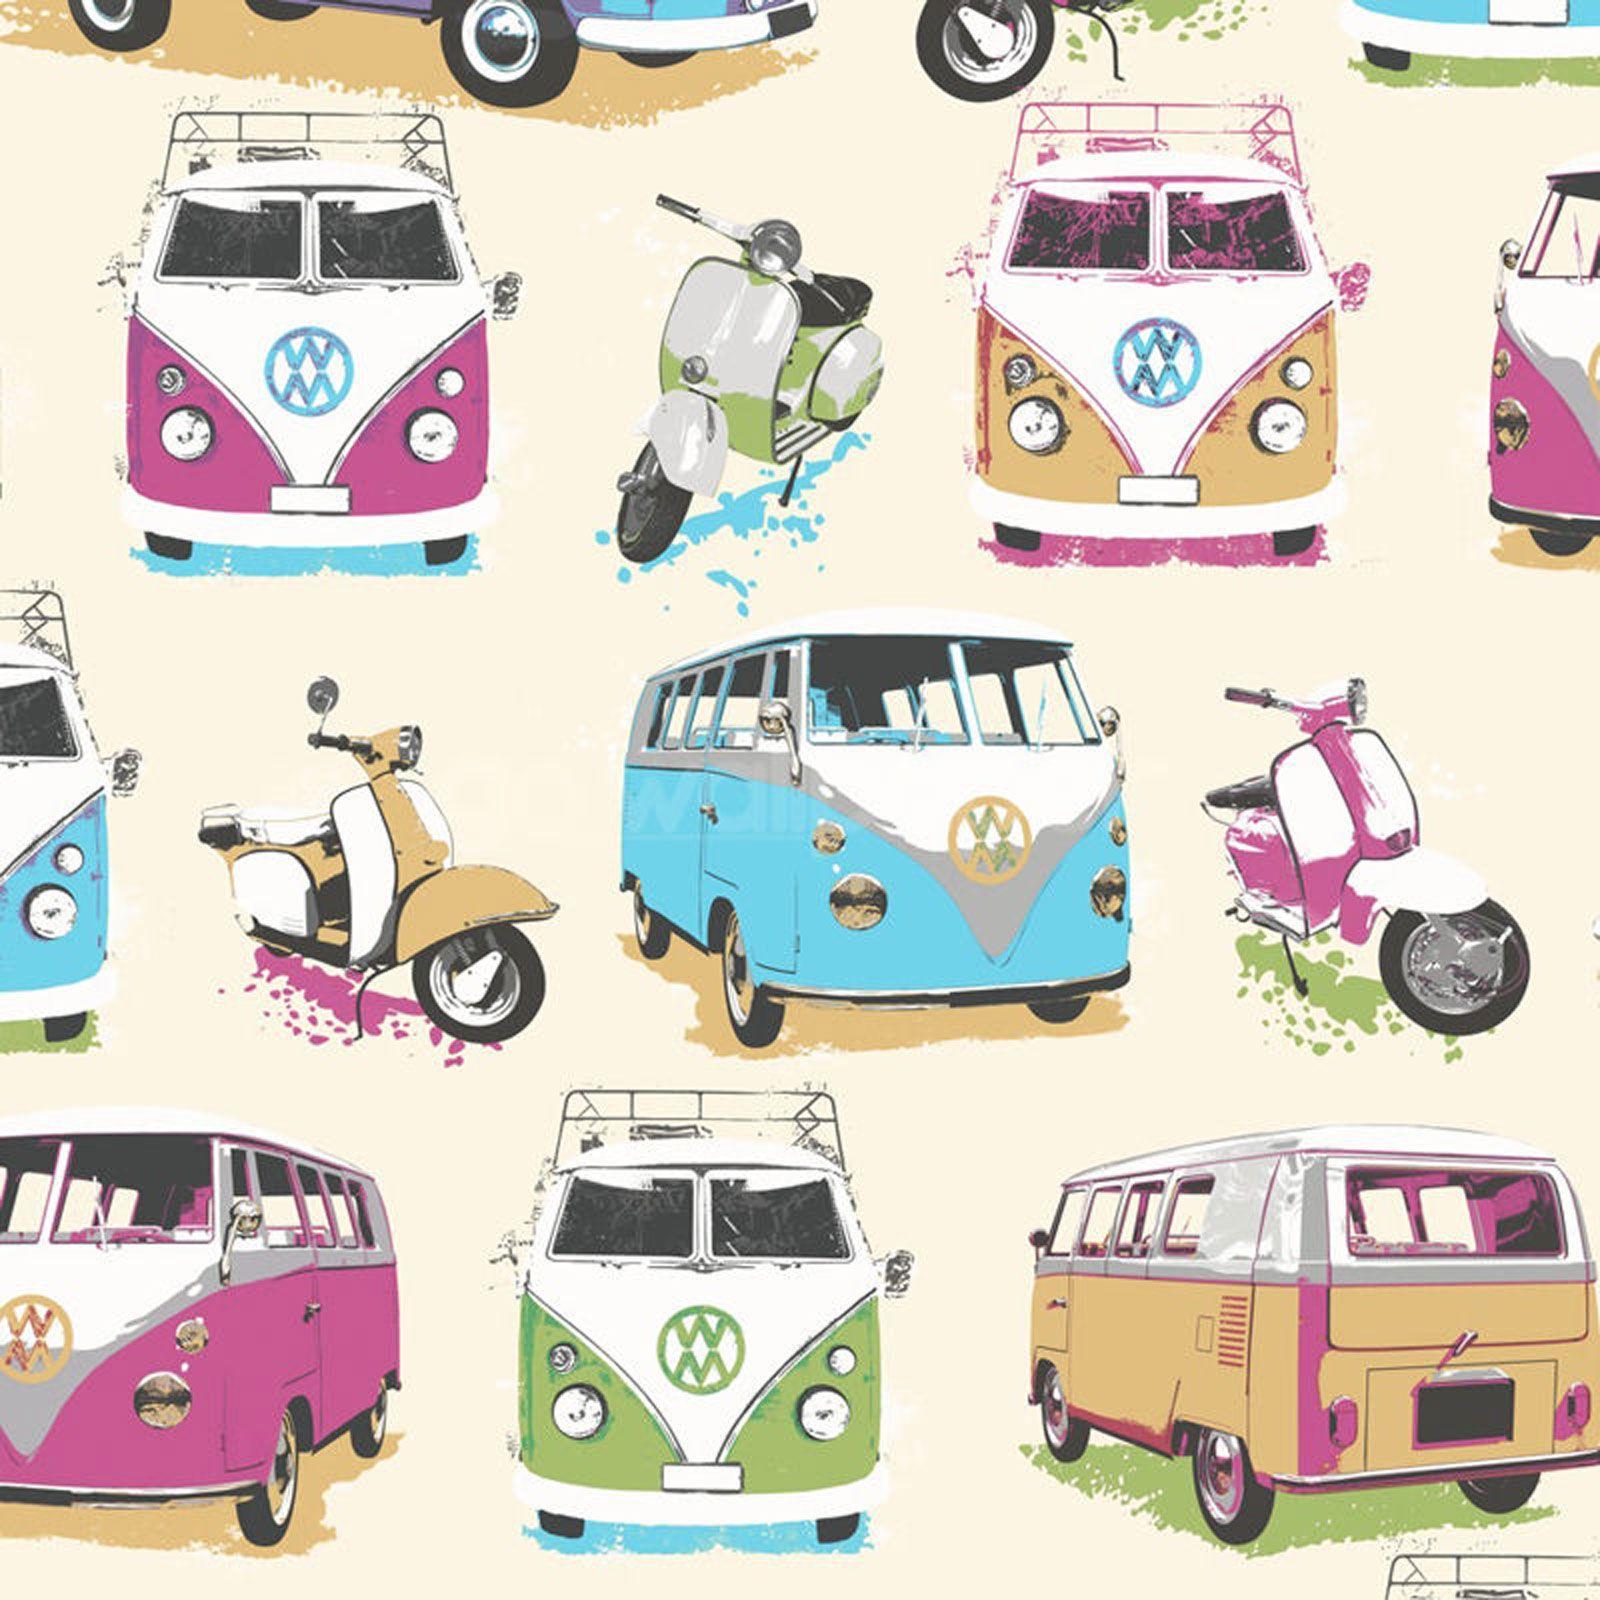 VOLKSWAGEN WALLPAPER SCOOTERS CITY CAMPERS WALL DECOR NEW